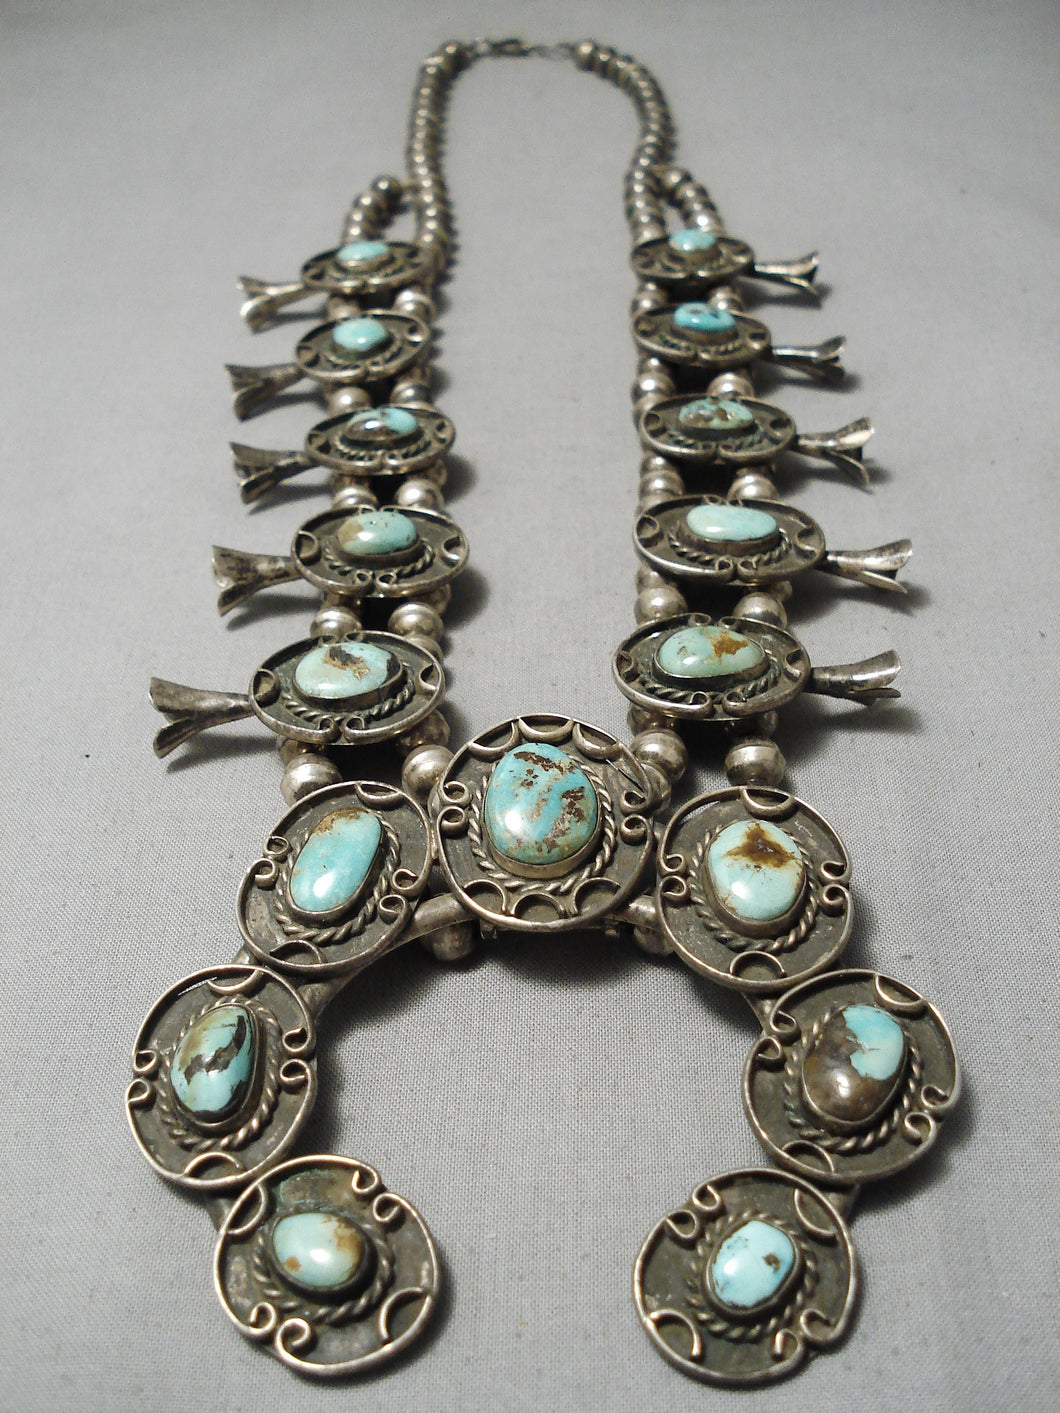 Fine Vintage Native American Navajo Royston Turquoise Sterling Silver Squqash Blossom Necklace